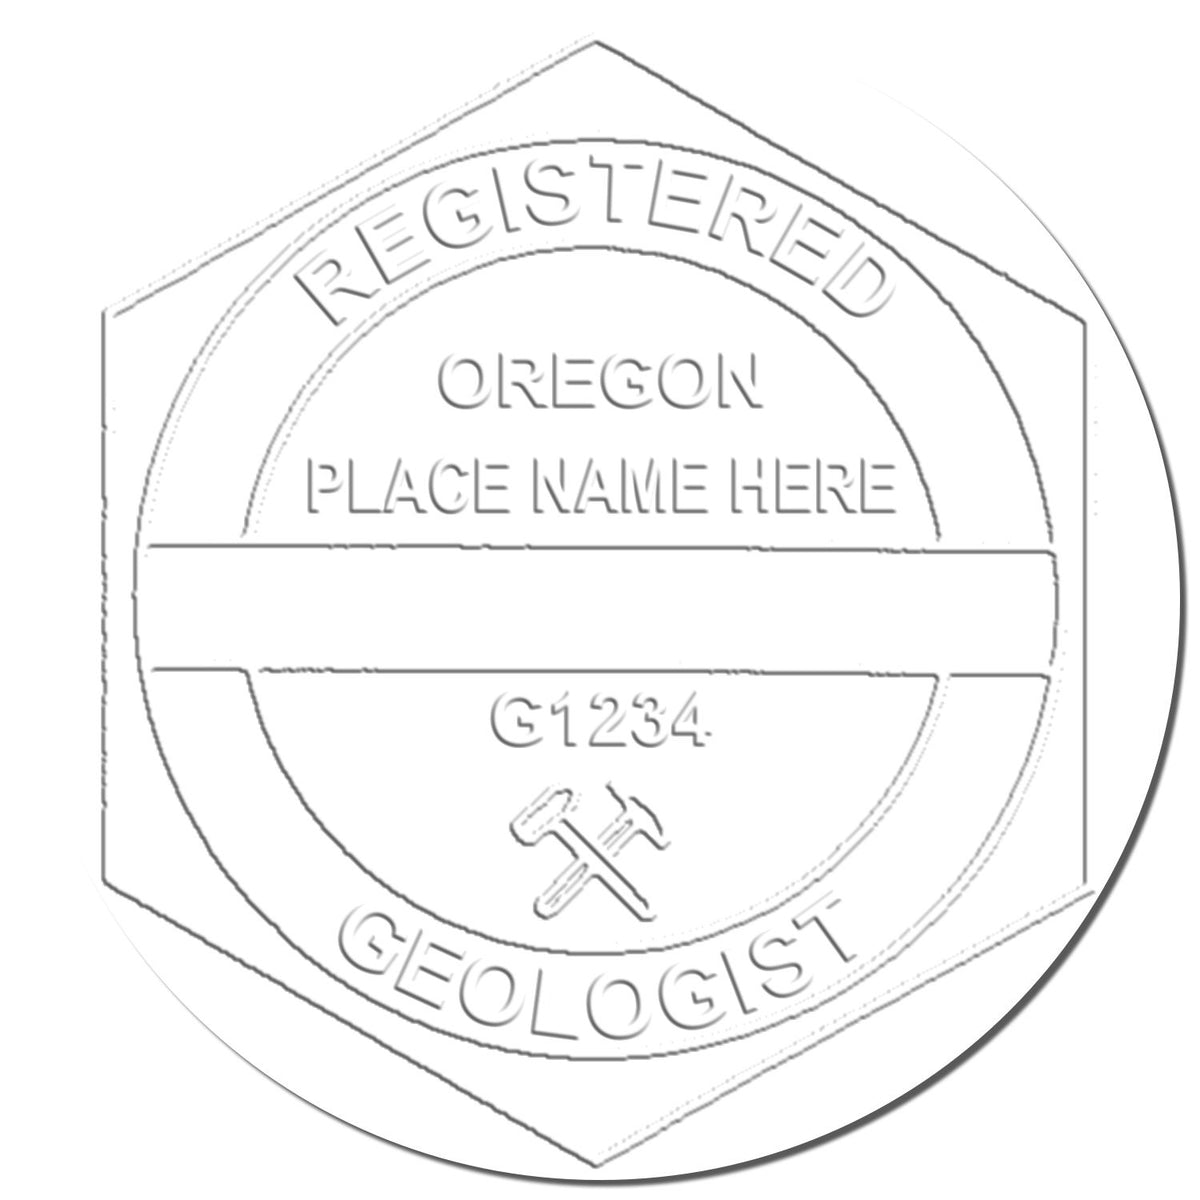 A photograph of the State of Oregon Extended Long Reach Geologist Seal stamp impression reveals a vivid, professional image of the on paper.